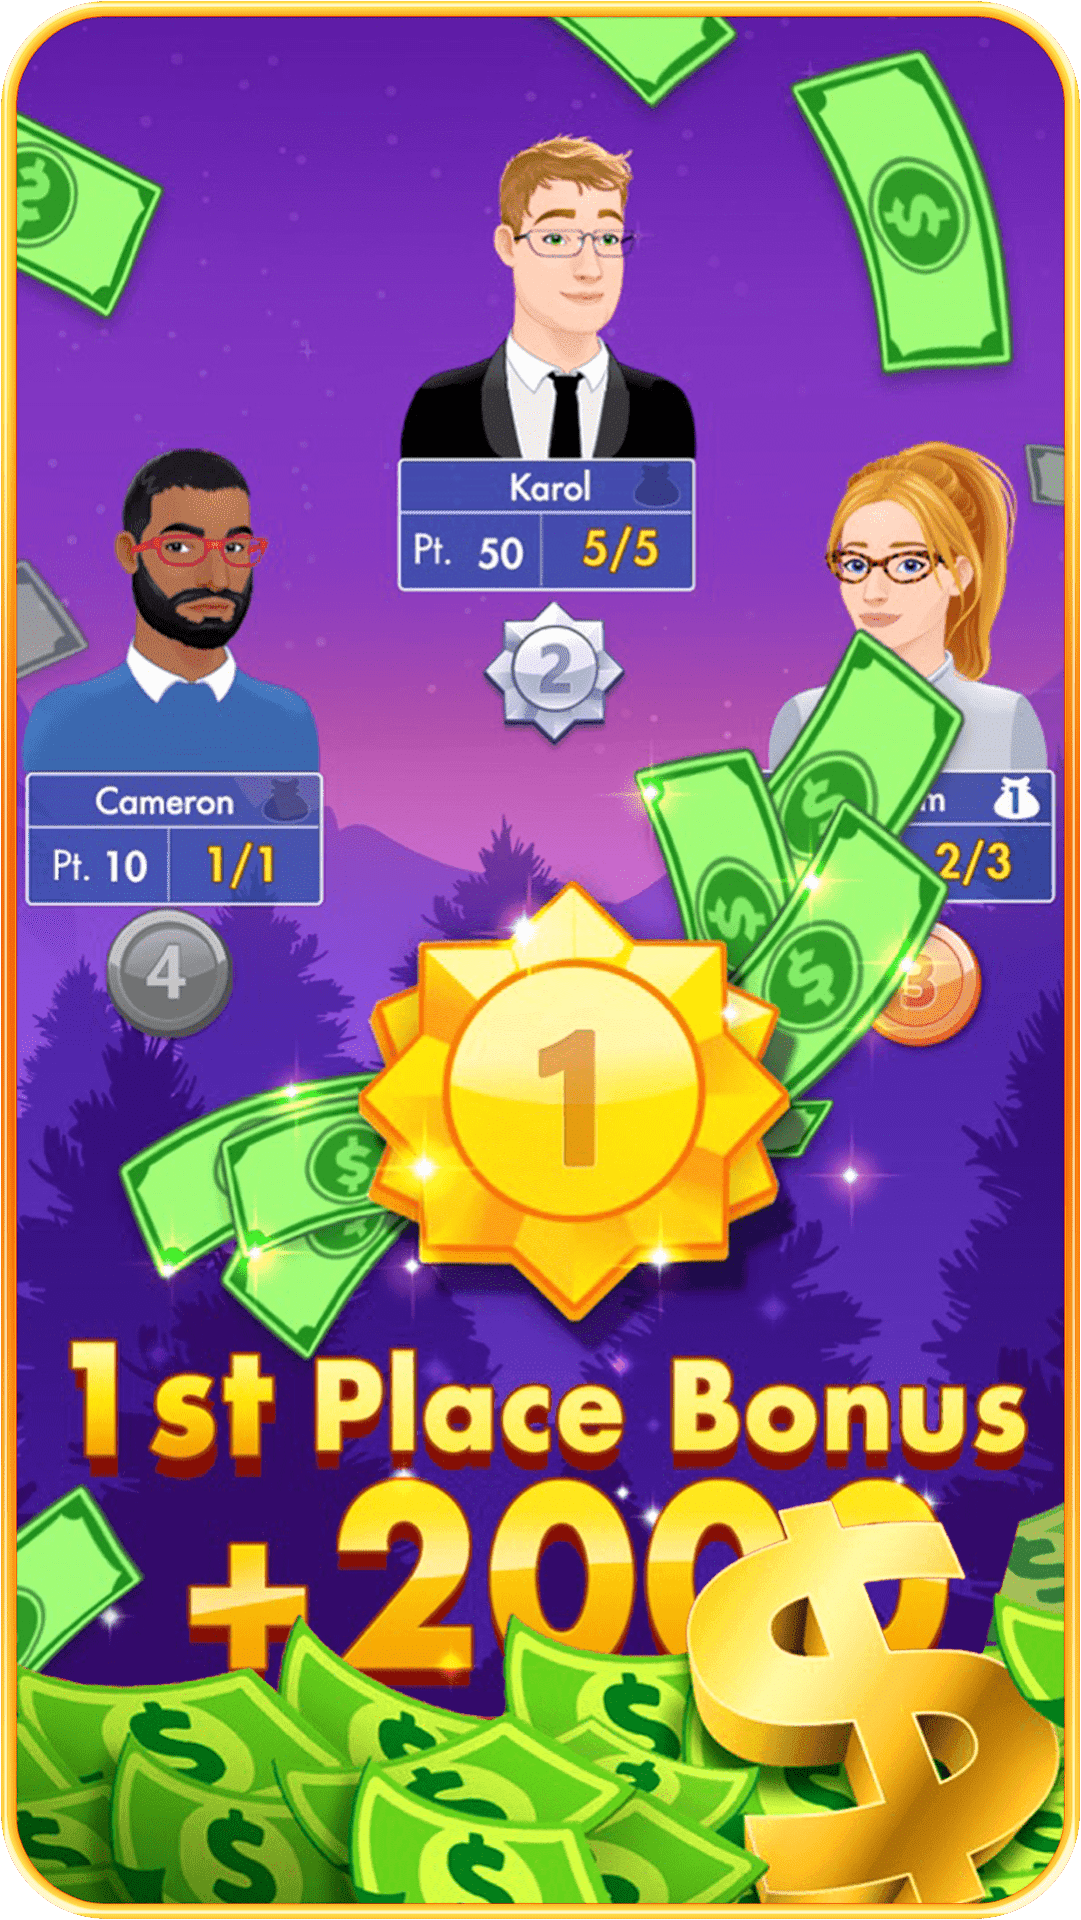 Bubble-Buzz Win Real Cash guia for Android - Free App Download